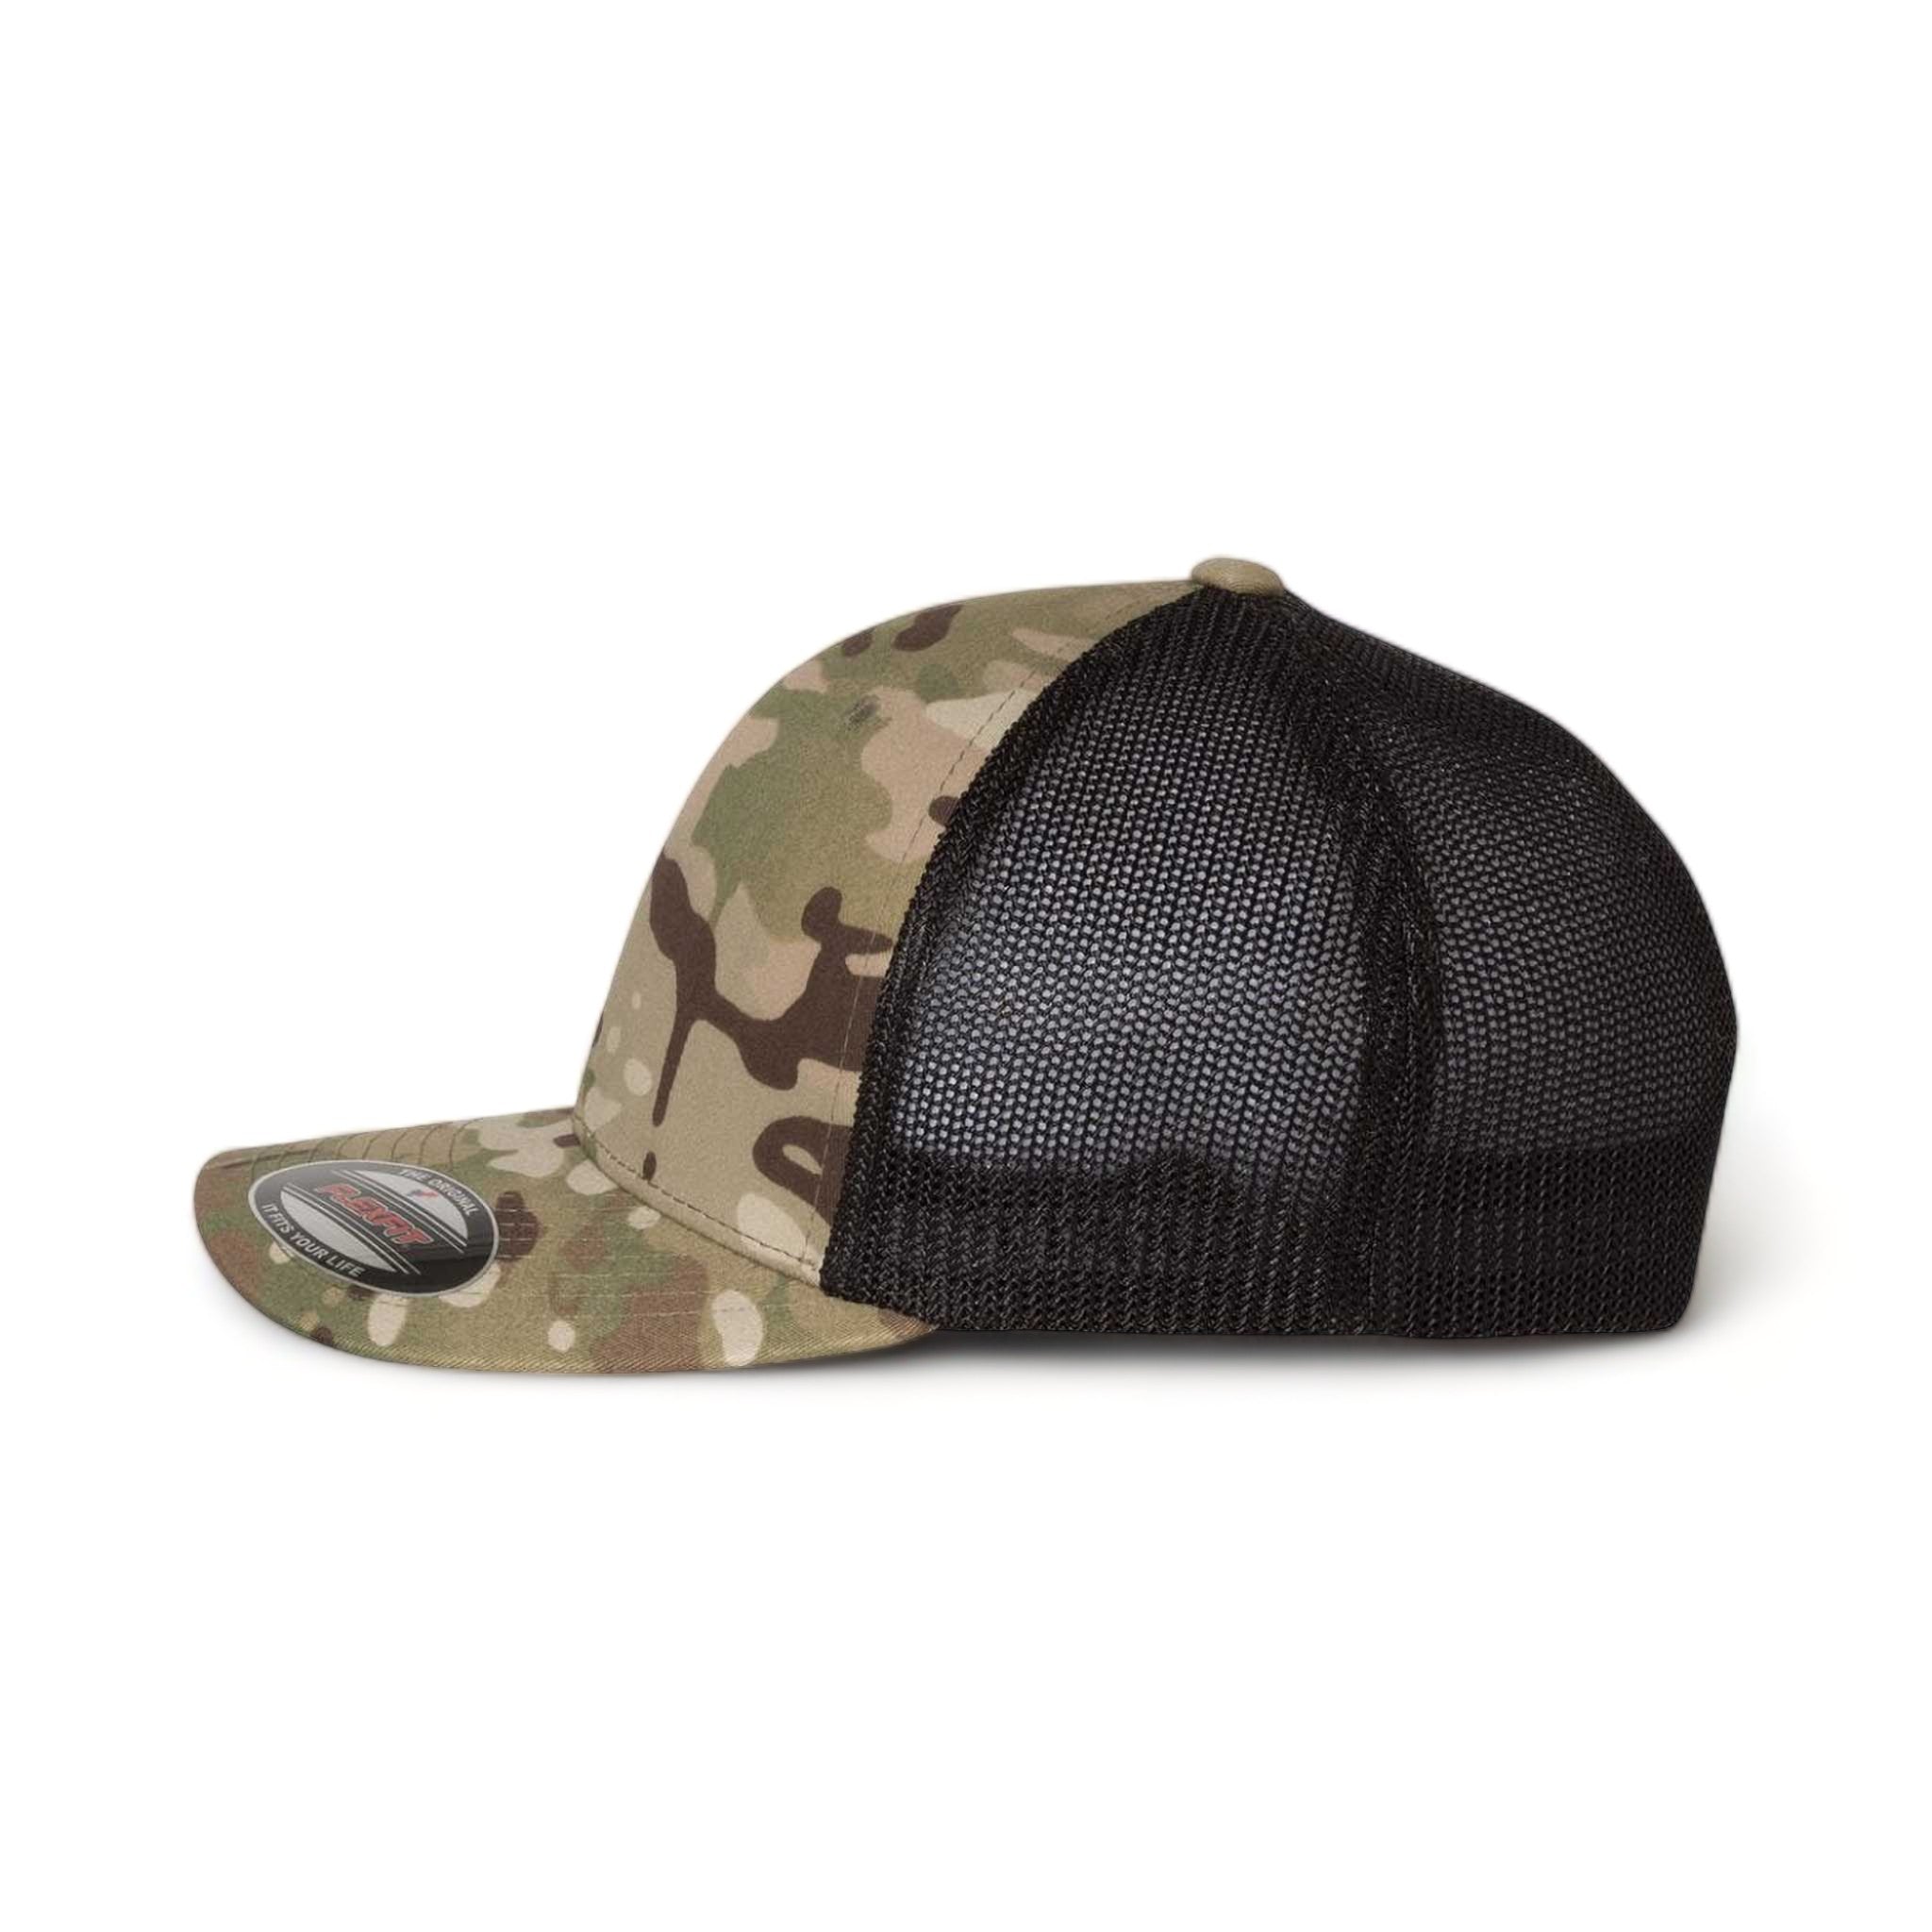 Side view of Flexfit 6511 custom hat in multicam green and black